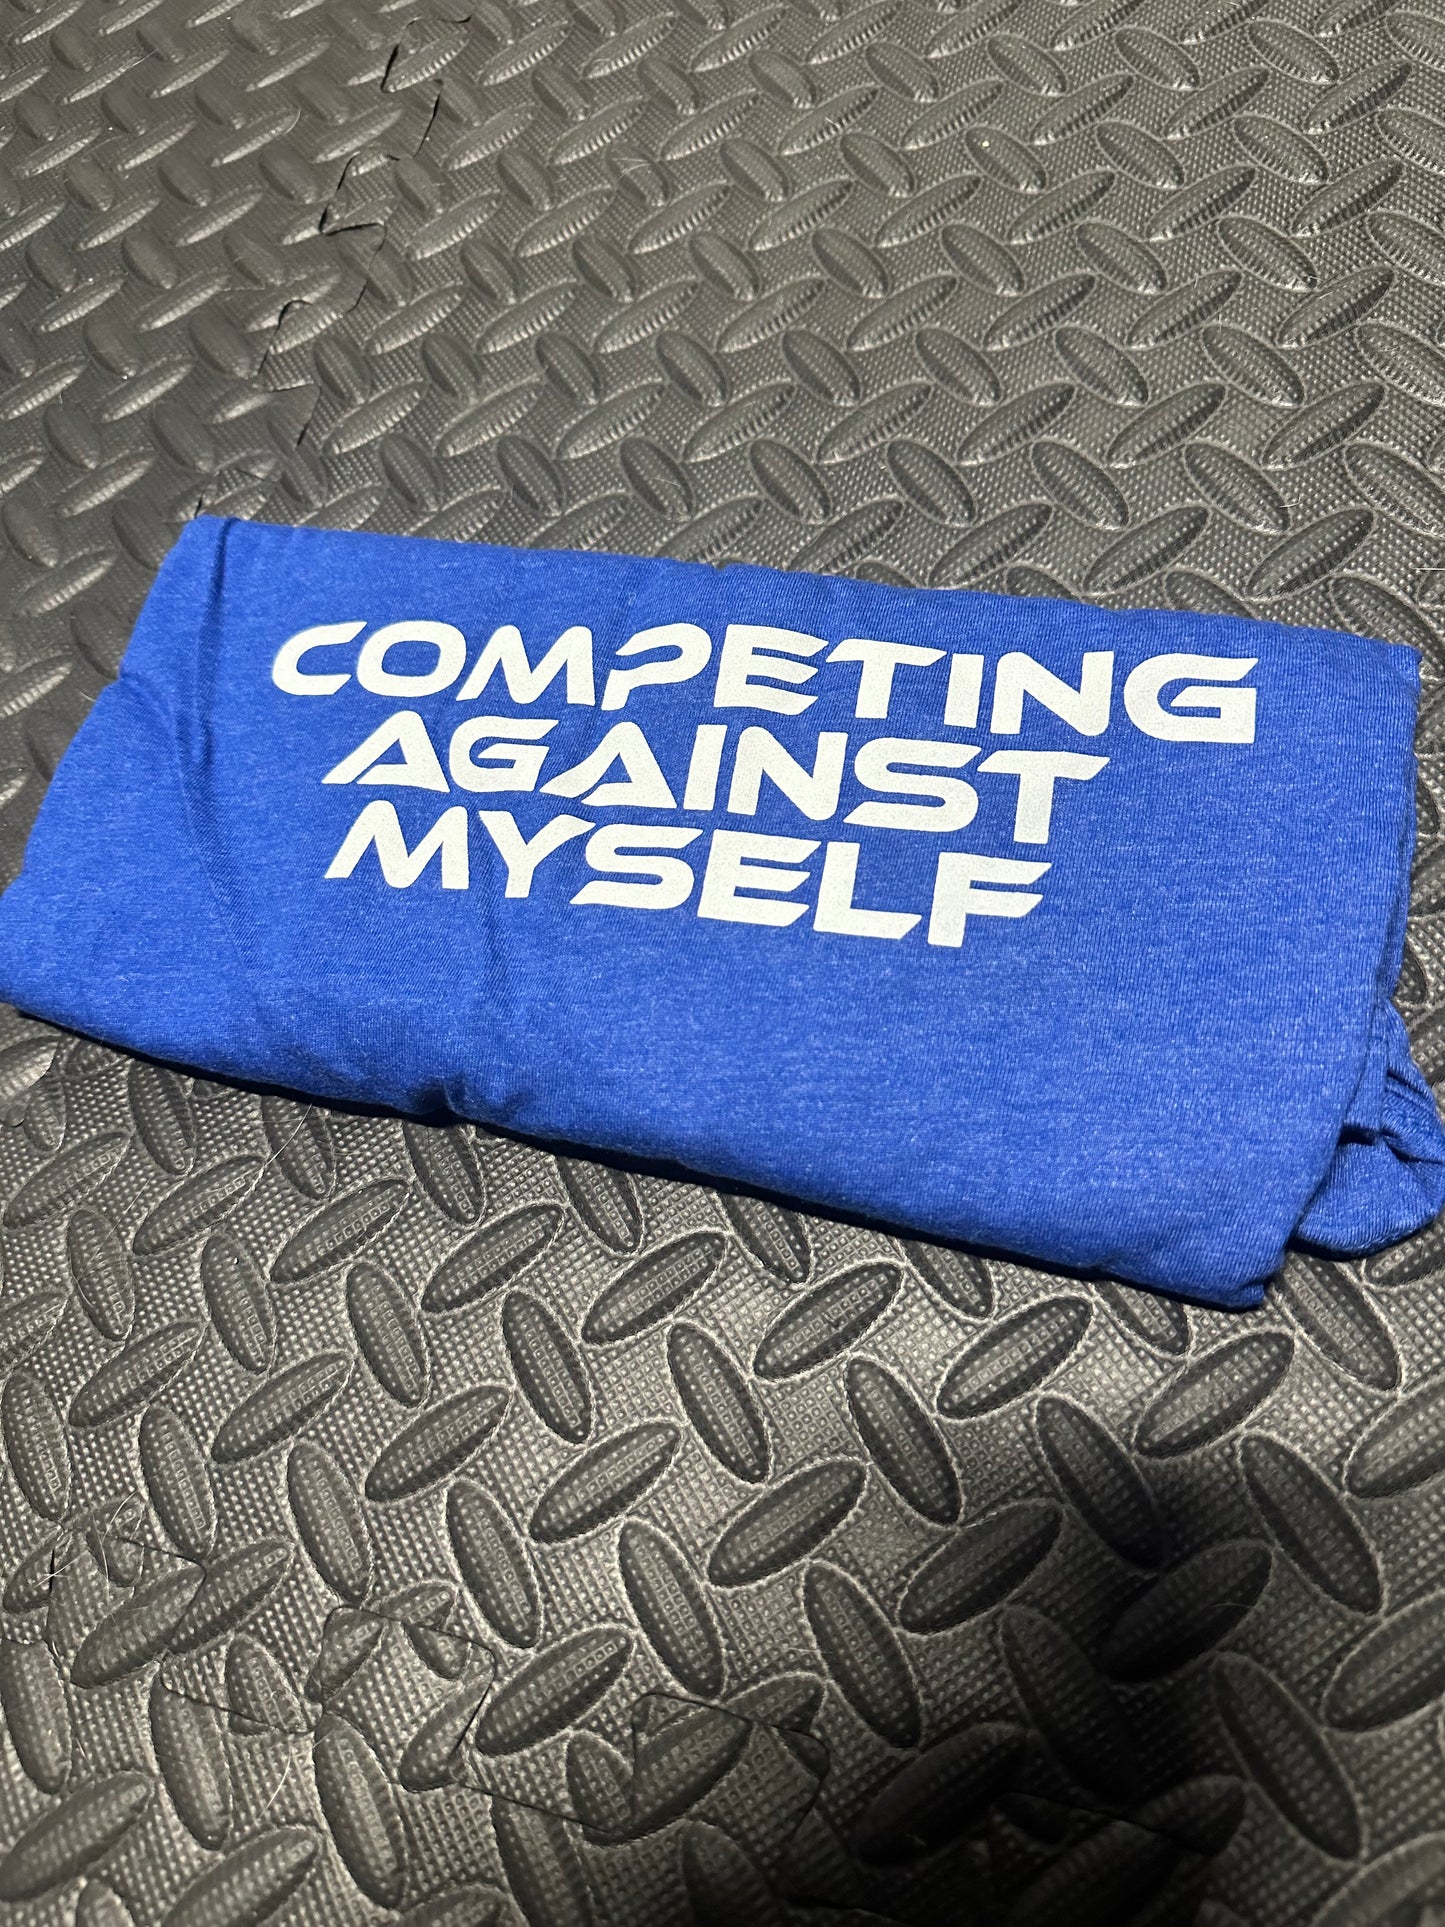 Motivation Collection #1: Competing Against Myself